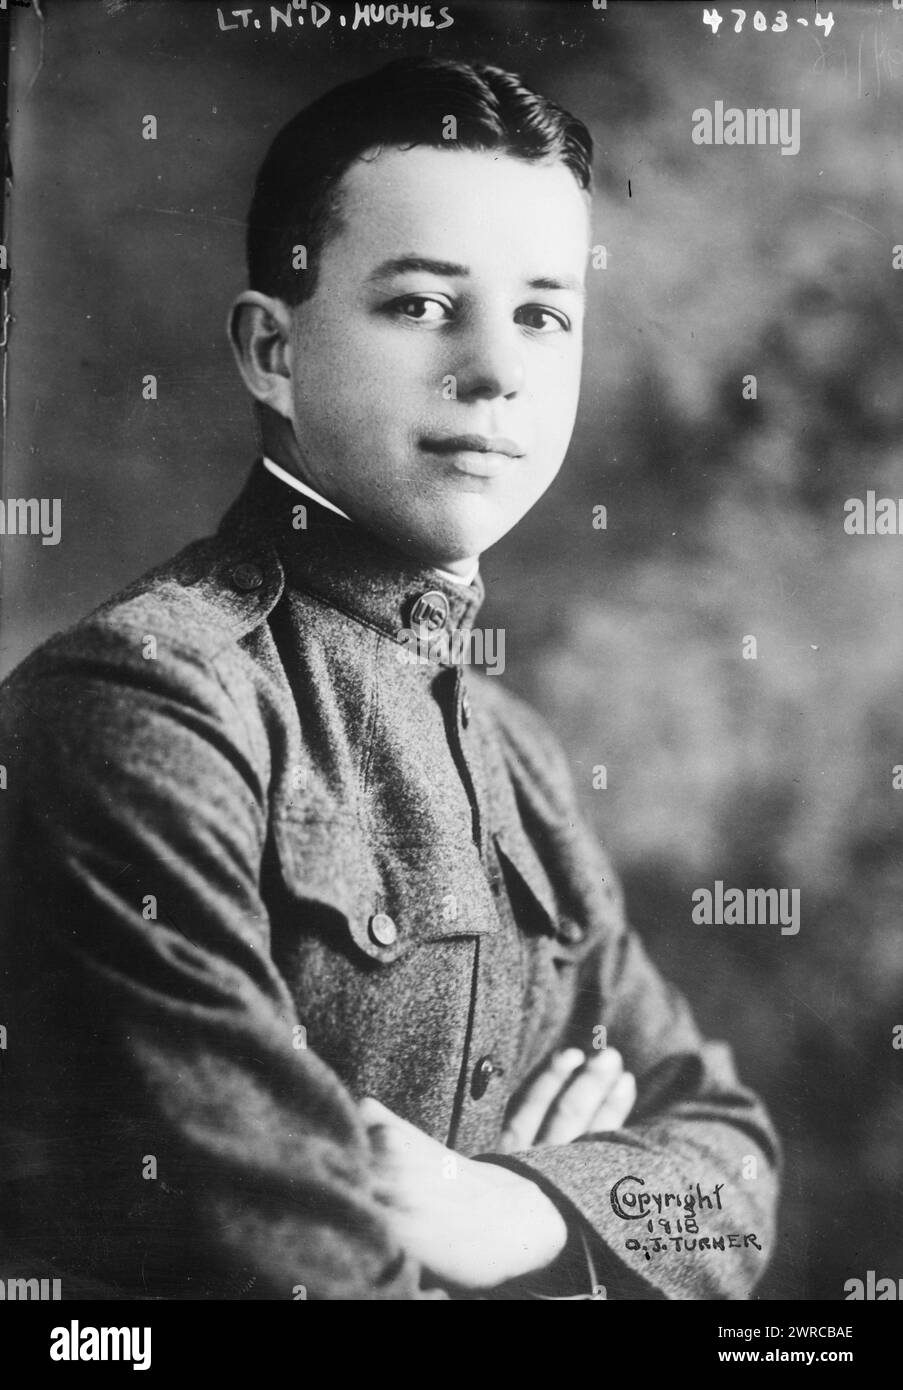 Lt. N.D. Hughes, Photograph shows Lieutenant Norman David Hughes (1896-1918), killed in action during World War I., between ca. 1915 and 1918, Glass negatives, 1 negative: glass Stock Photo